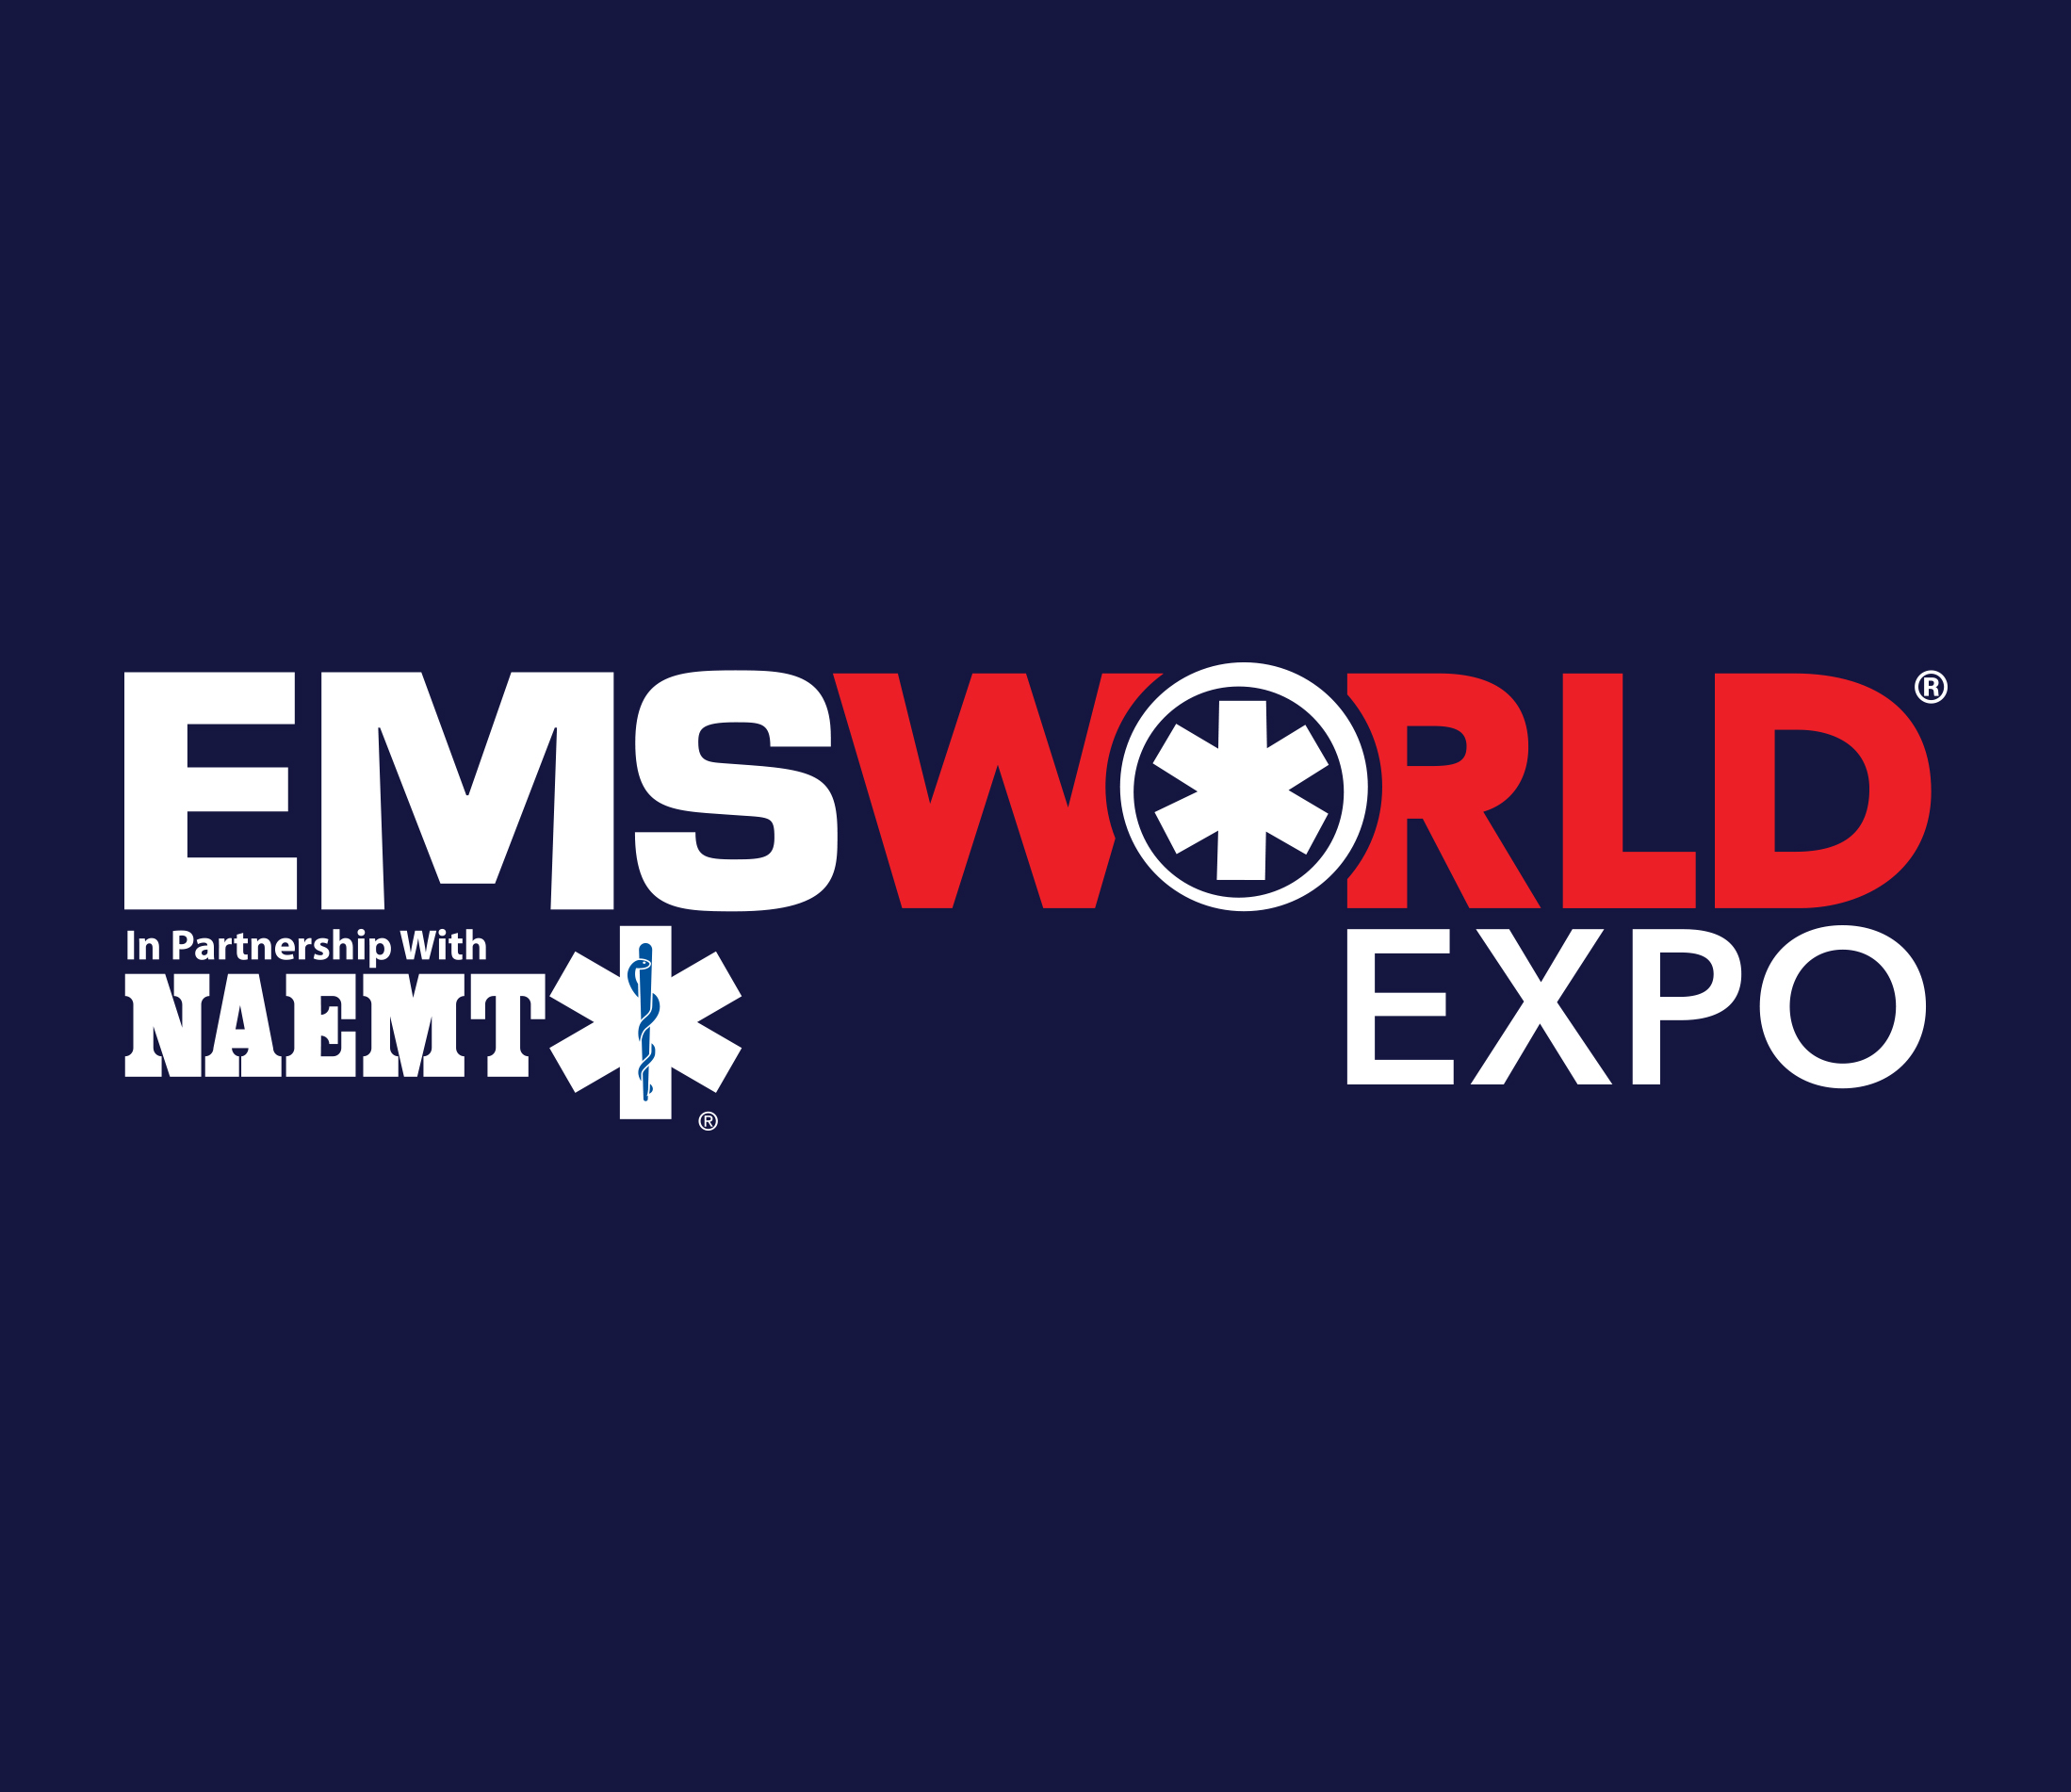 HMP’s EMS World Expo Recognized as One of the “Fastest 50” Trade Shows